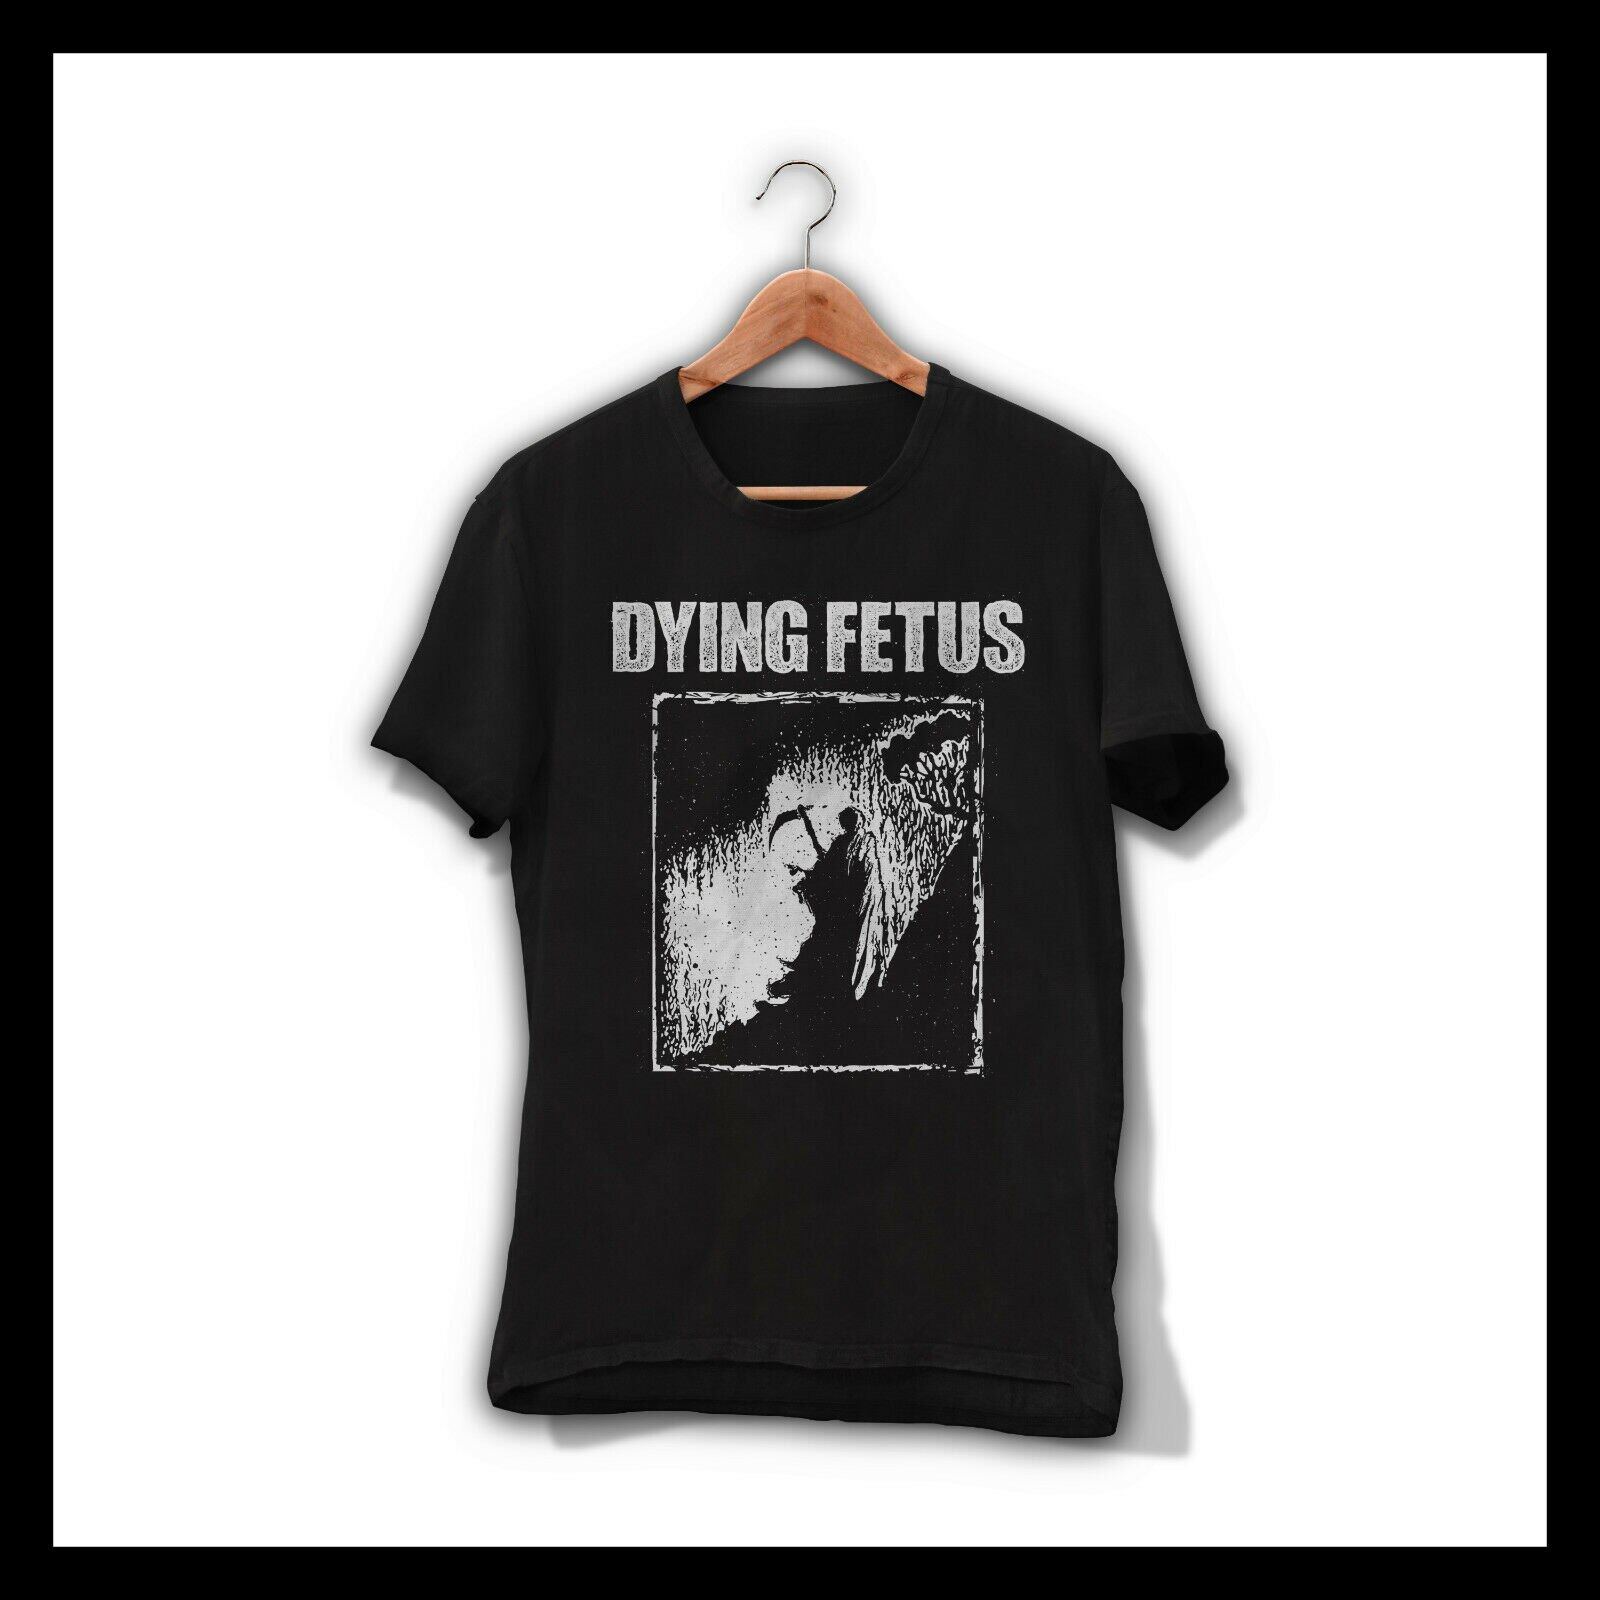 Dying Fetus Die with Integrity T-Shirt New Relapse Records Ts4496 